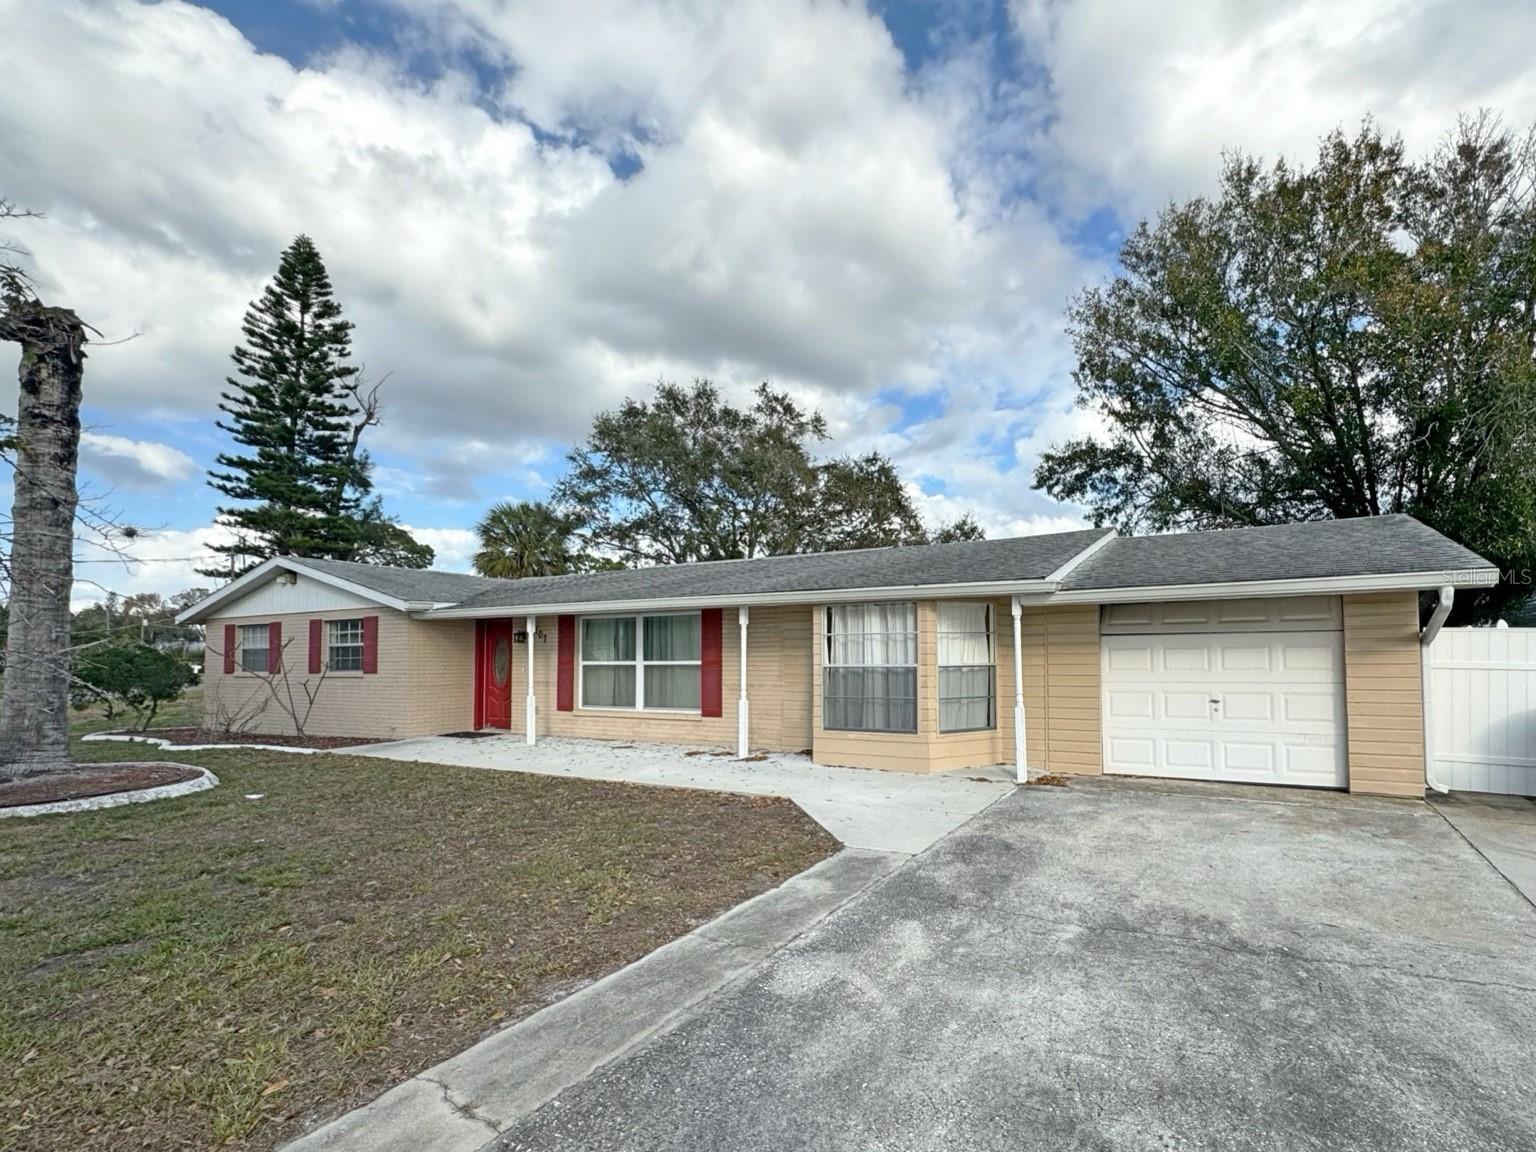 Details for 107 North Branch Road, RUSKIN, FL 33570